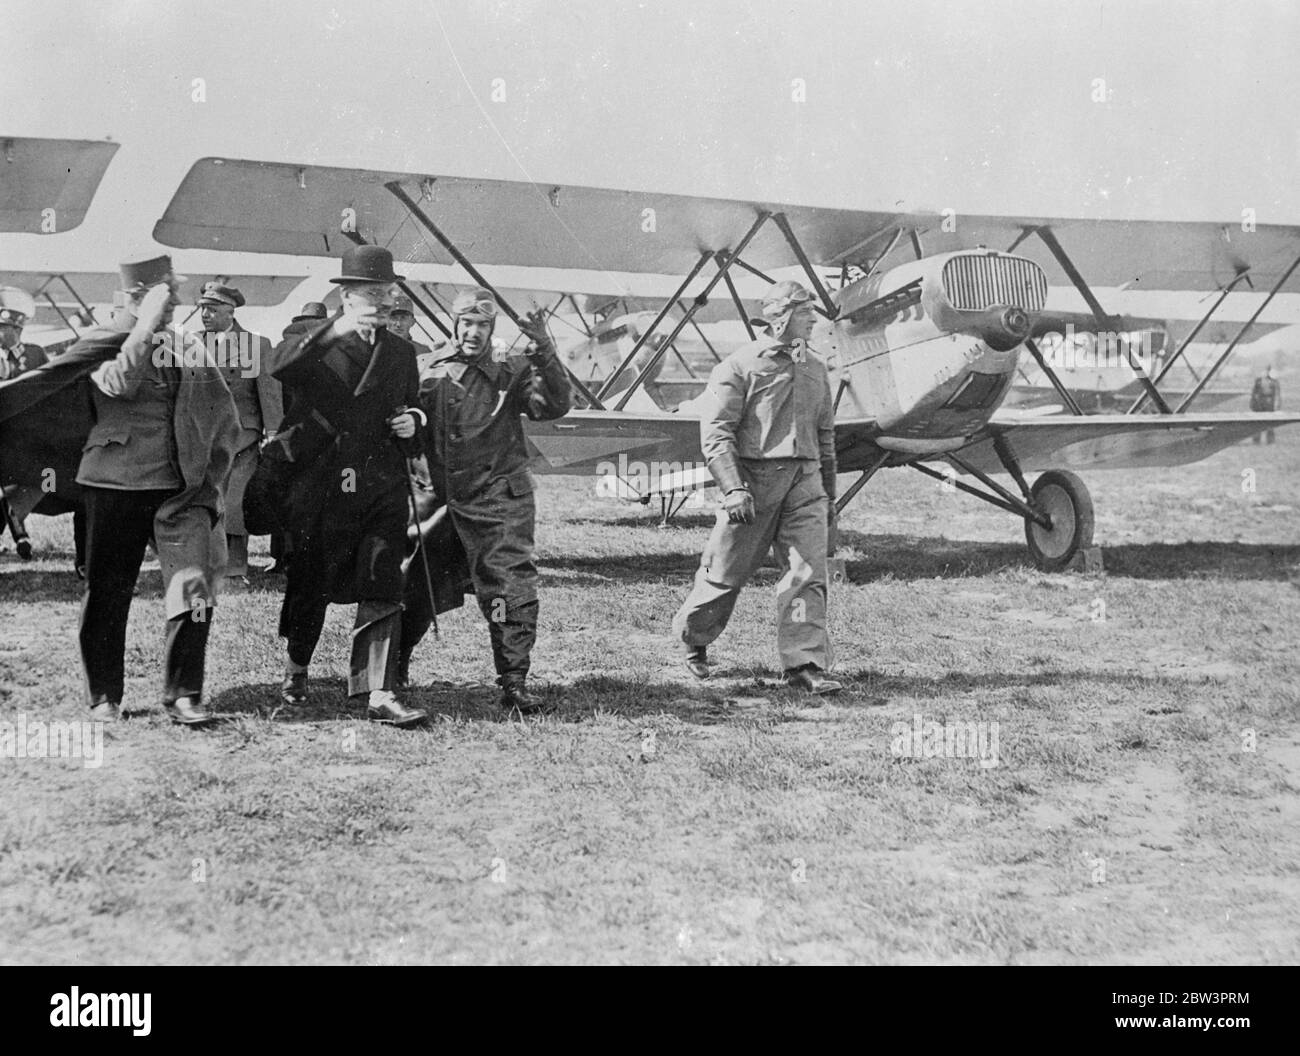 Chancellor Schuschnigg makes first inspection of Austia ' s fighting planes . Although military aeroplanes are forbidden Austria under post war treaties , Chancellor Schuschnigg made his first inspection of Austria ' s new fighting planes during the military Sping parade in Vienna . Austria recently repudiated the Treaty of St Germain , by which she was bound to an army of only 30 , 000 men by reintroducing conscription . Photo shows , Chancellor Schuschnigg saluting as he made his inspection of the fighting planes at the Vienna flying field . 20 April 1936 Stock Photo